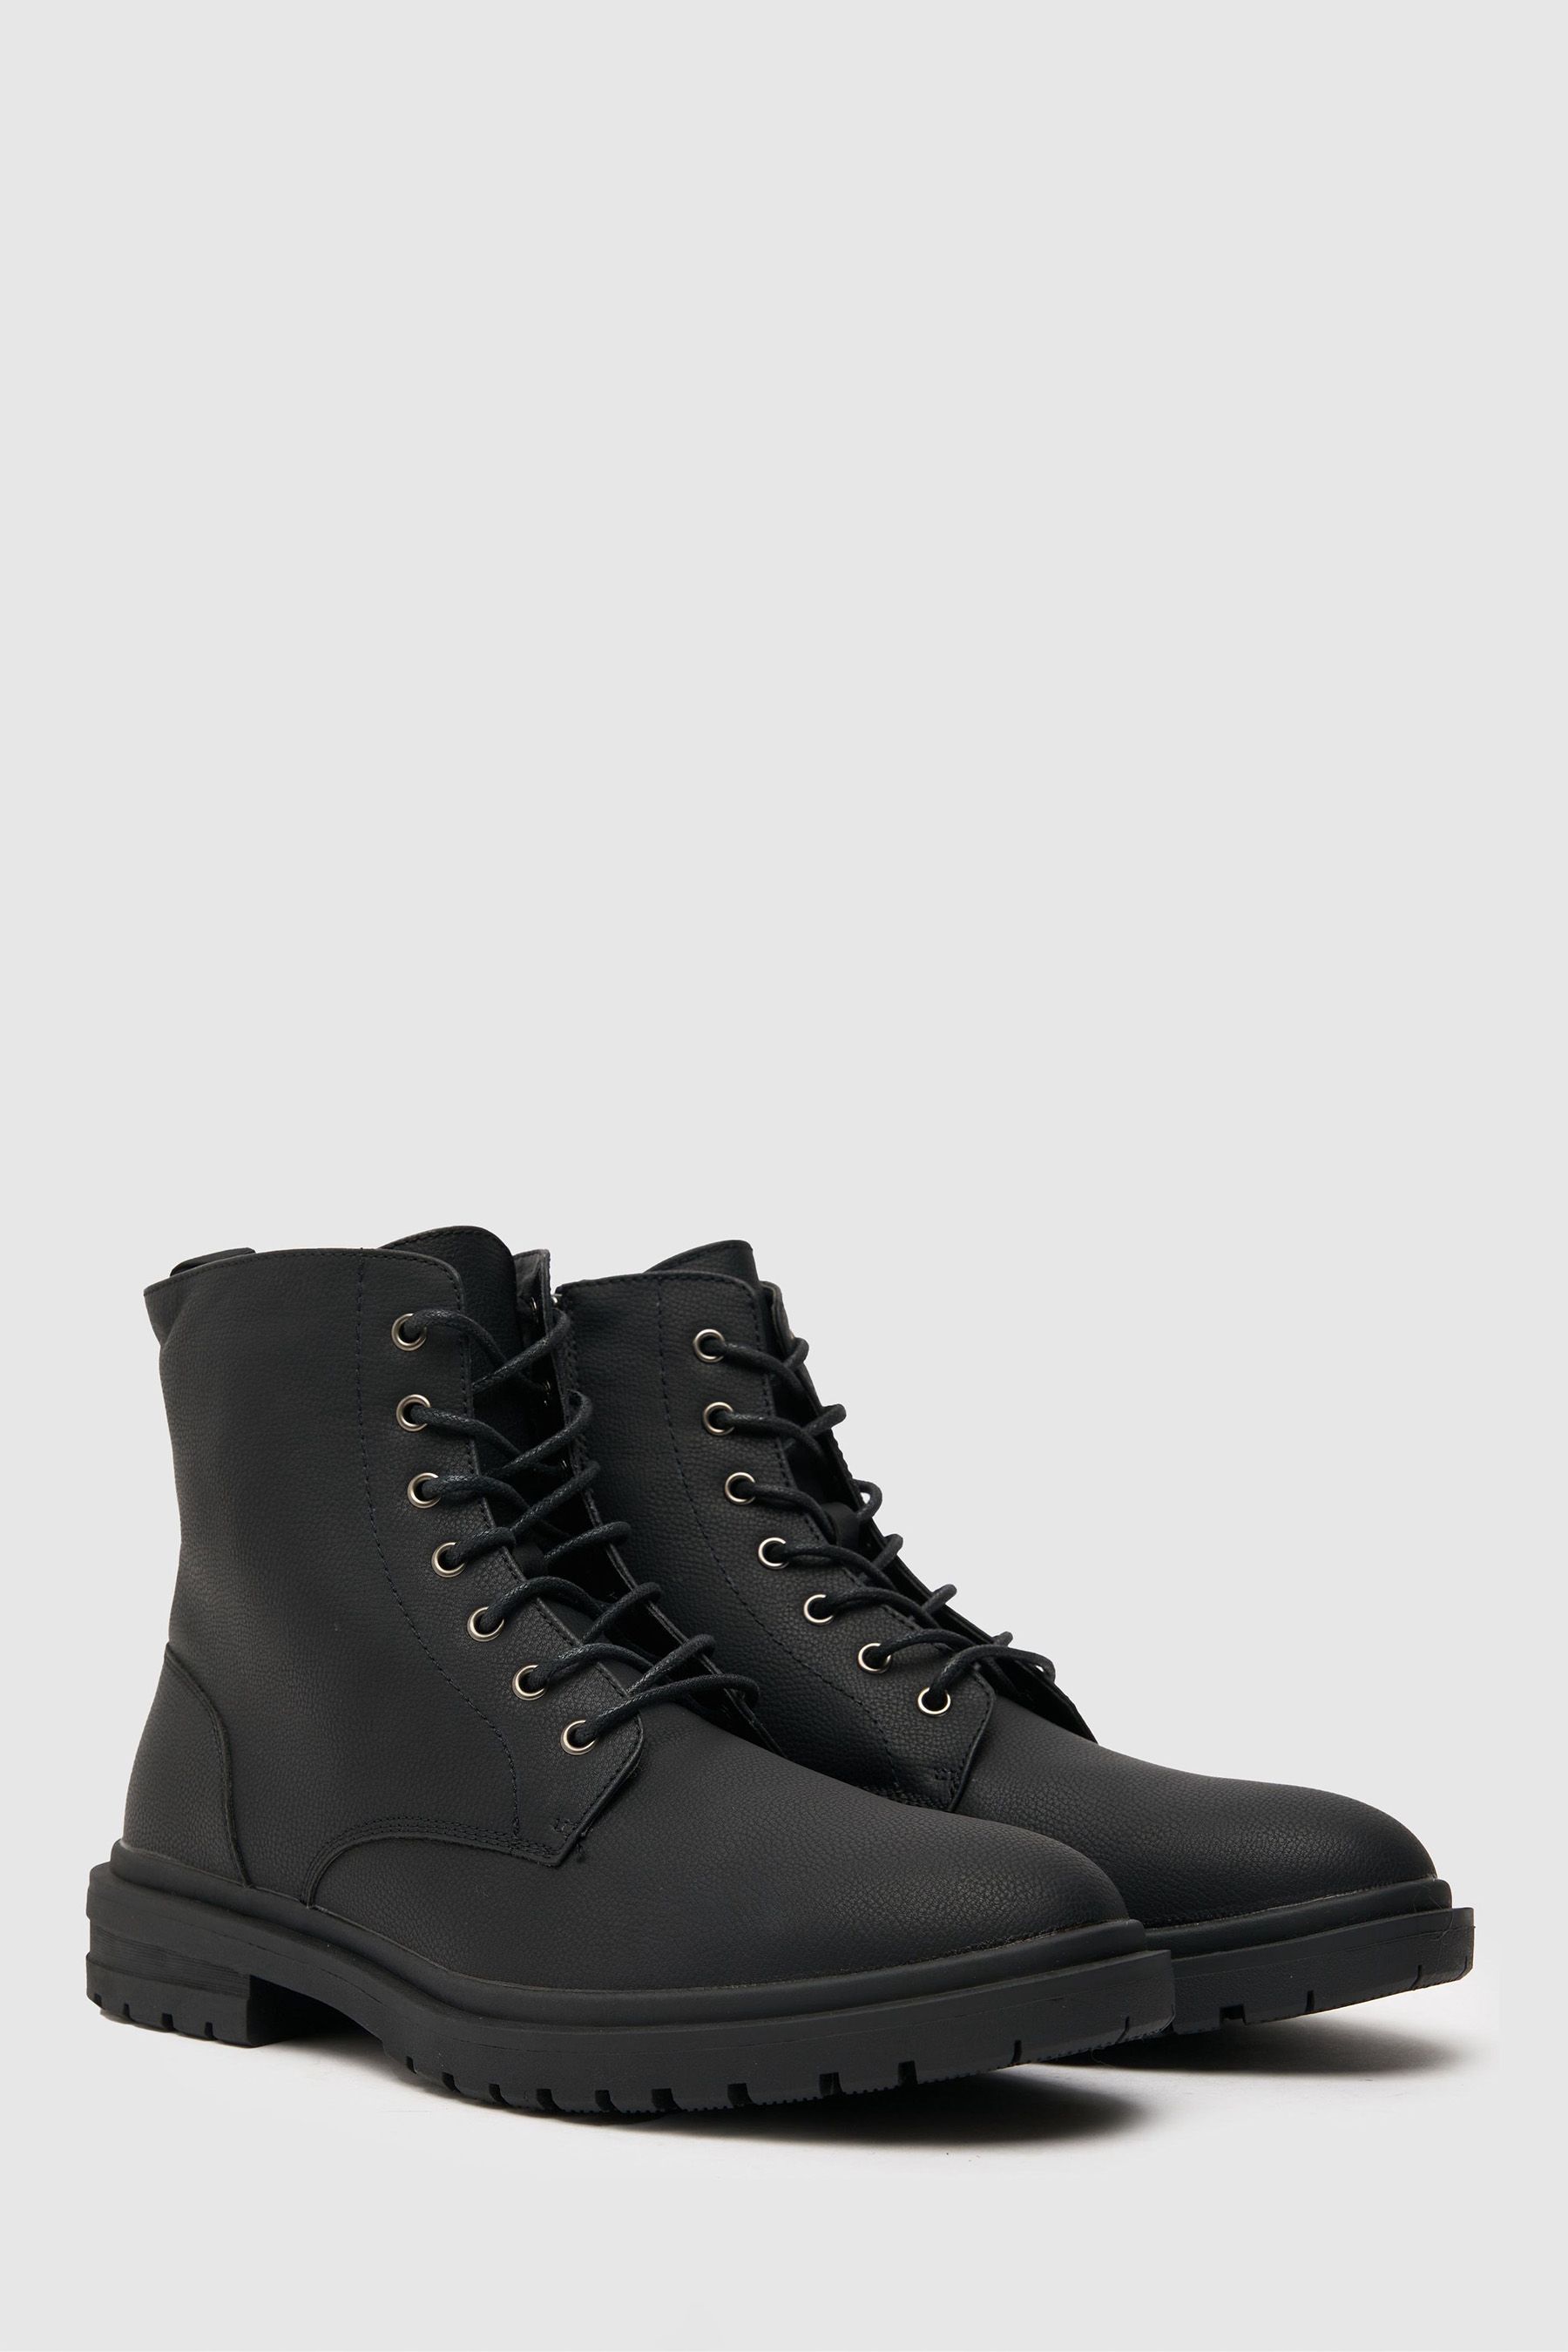 Buy Schuh Duncan Black Lace-Up Boots from the Next UK online shop